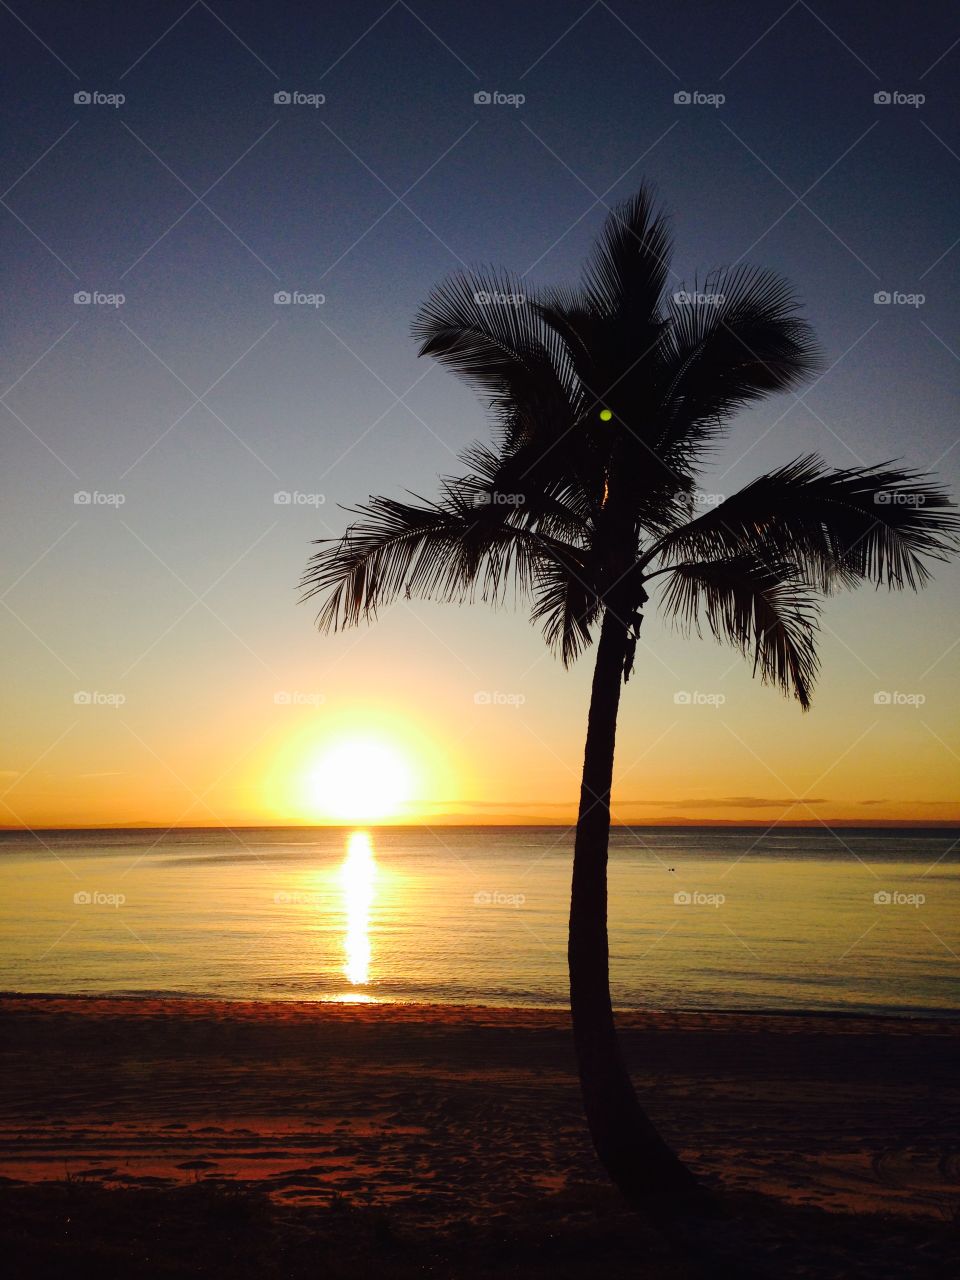 Palm tree at beach during sunset